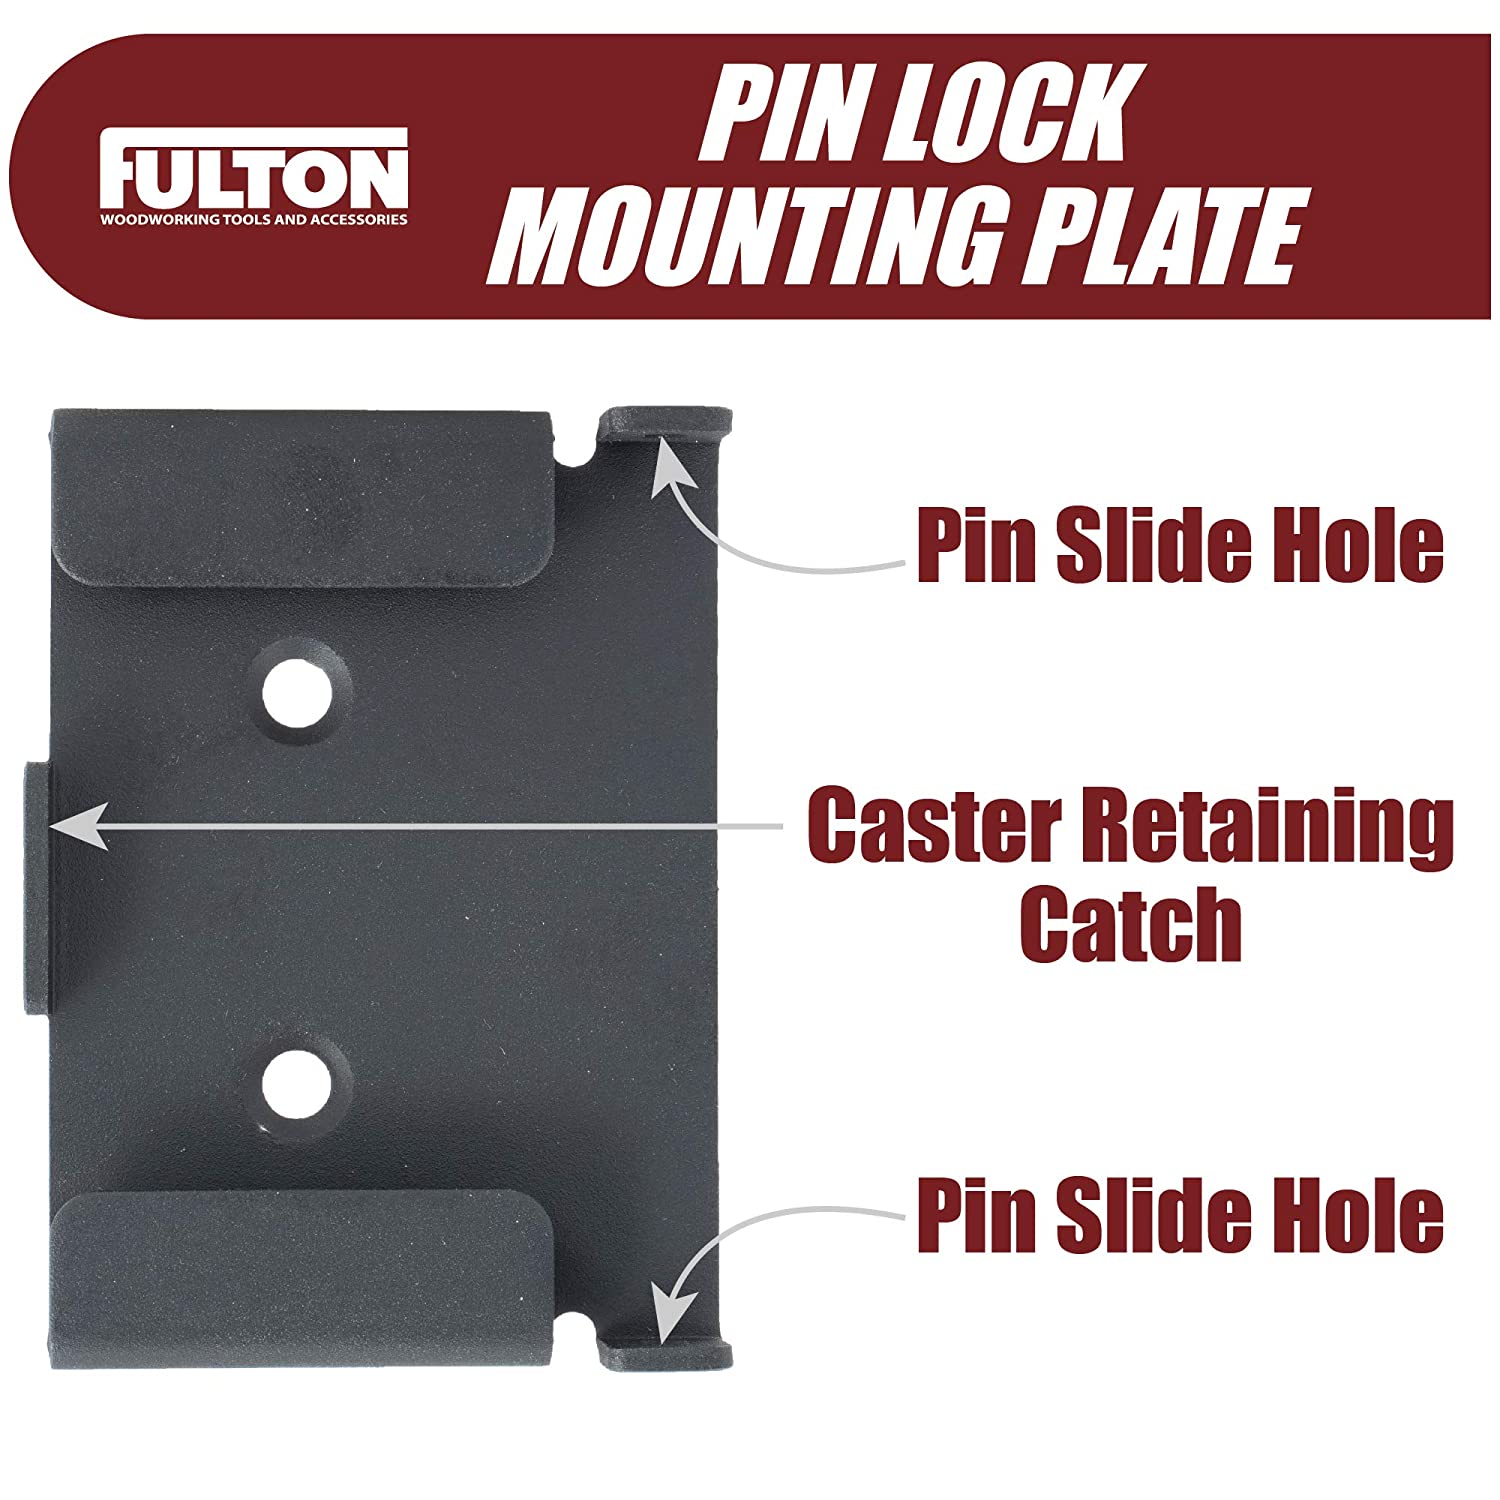 Fulton Workbench Casters with PIN Lock Mounting Plates, Caster Wheels  11559 Lazada PH